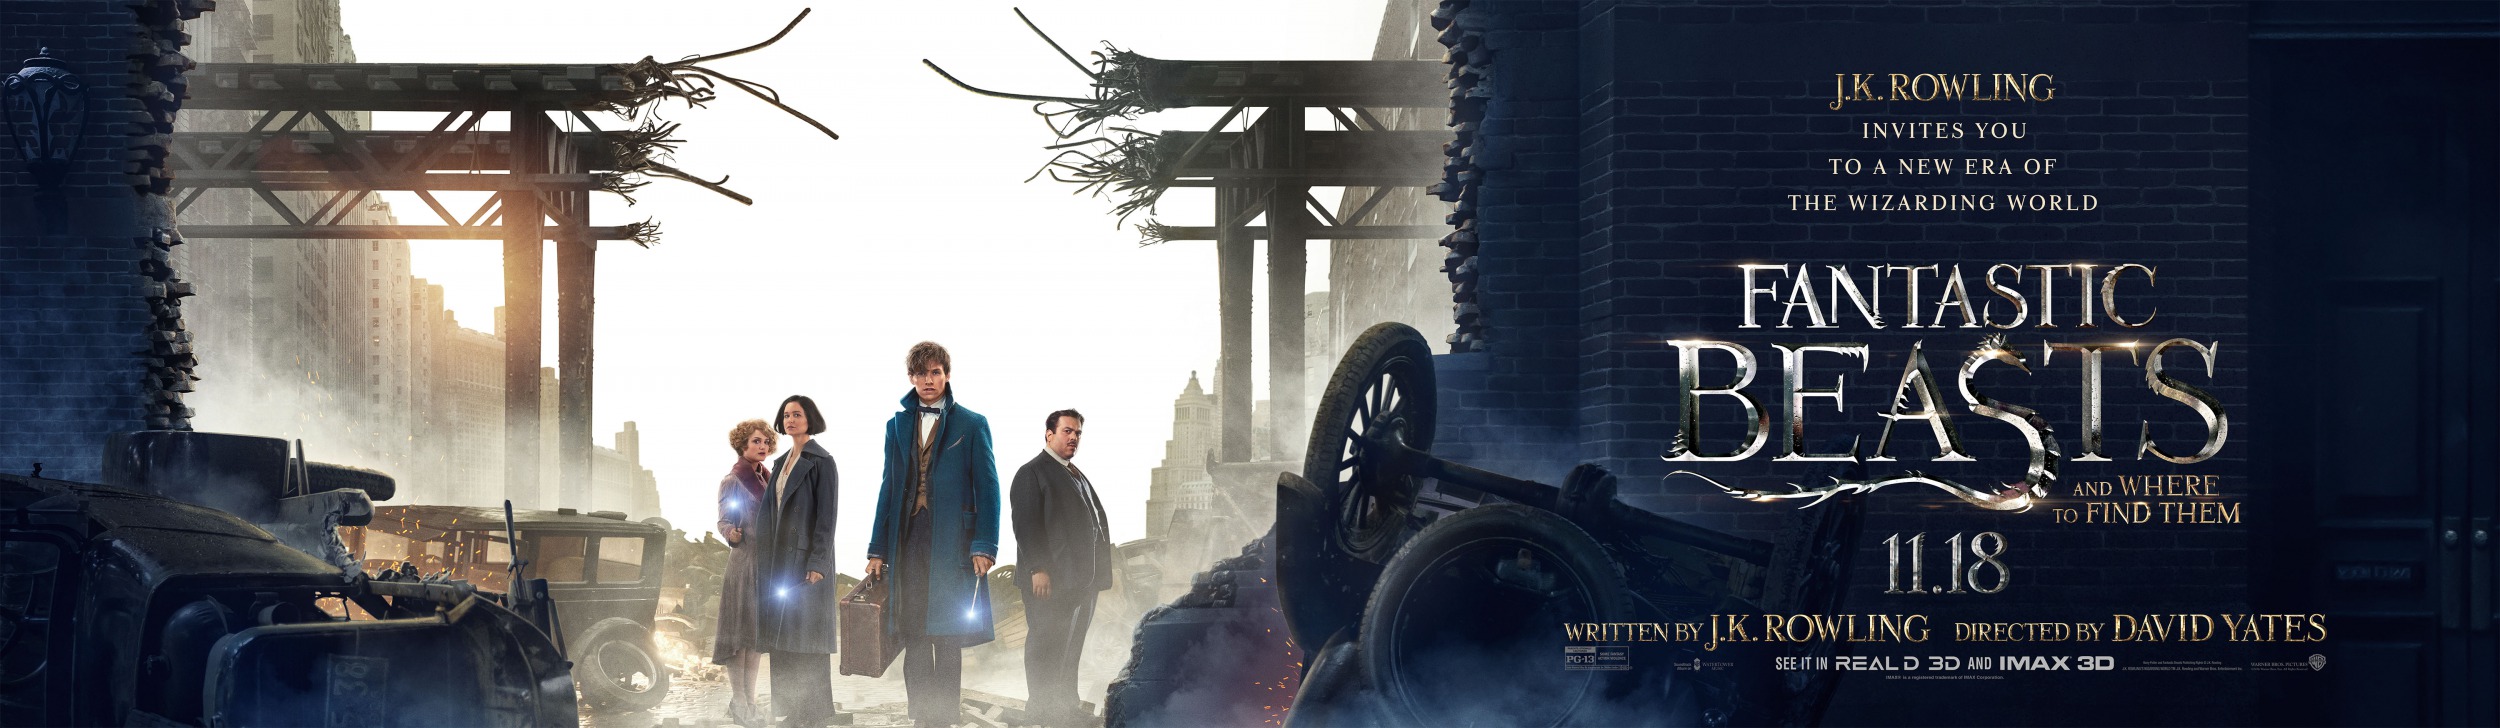 Mega Sized Movie Poster Image for Fantastic Beasts and Where to Find Them (#19 of 23)